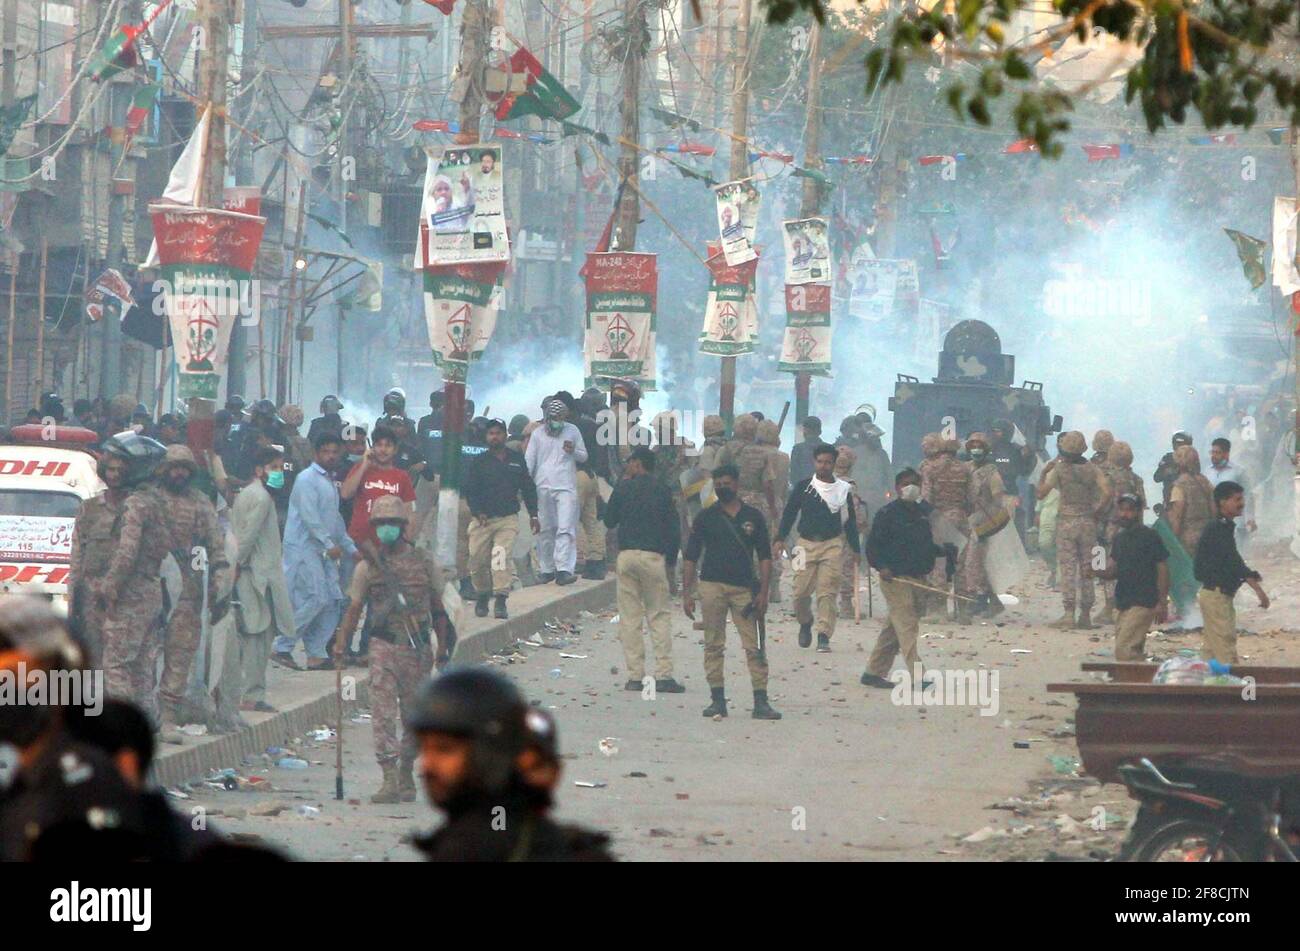 Police officials restore baton charge and fired tear gas shells to repel protesters during protest demonstration of Tehreek-e-Labbaik (TLP) against arrested of Saad Hussain Rizvi, Chief of Tehreek-e-Labbaik Pakistan (TLP) son of late cleric Khadim Hussain Rizvi, at Baldia Town in Karachi on Tuesday, April 13, 2021. Stock Photo